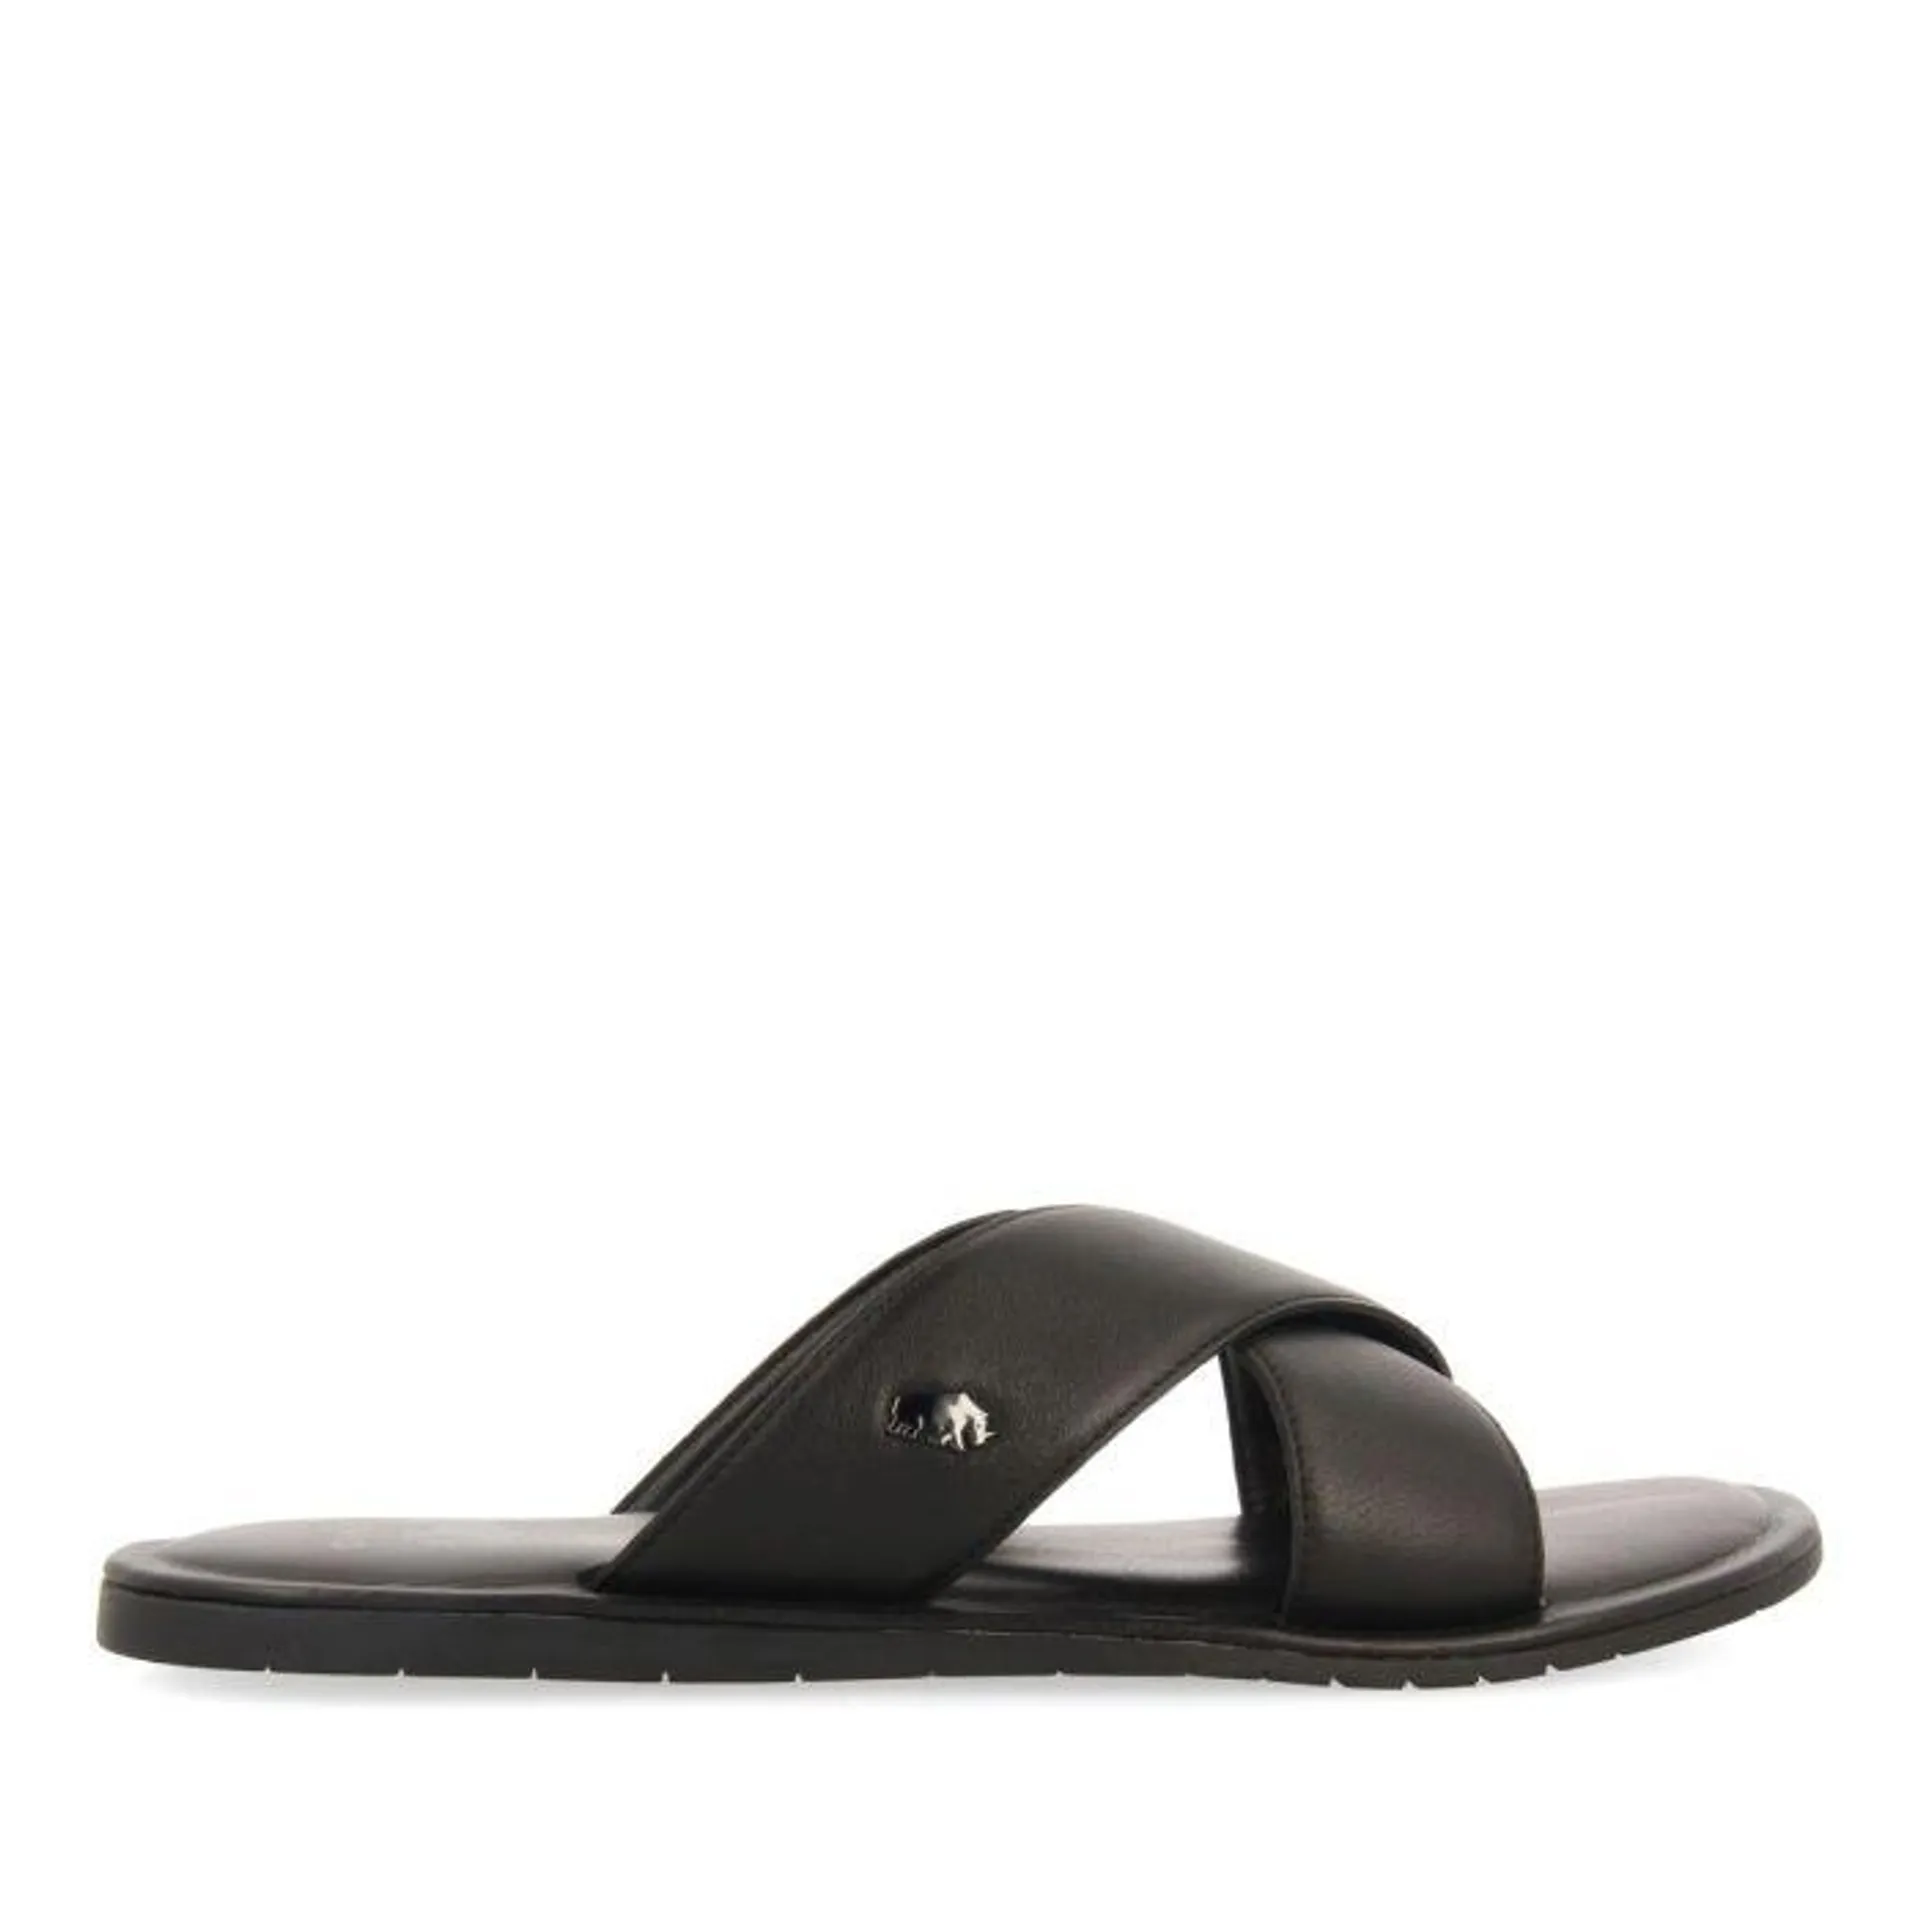 BLACK LEATHER SANDALS WITH CROSS STRAP FOR MEN OROSH